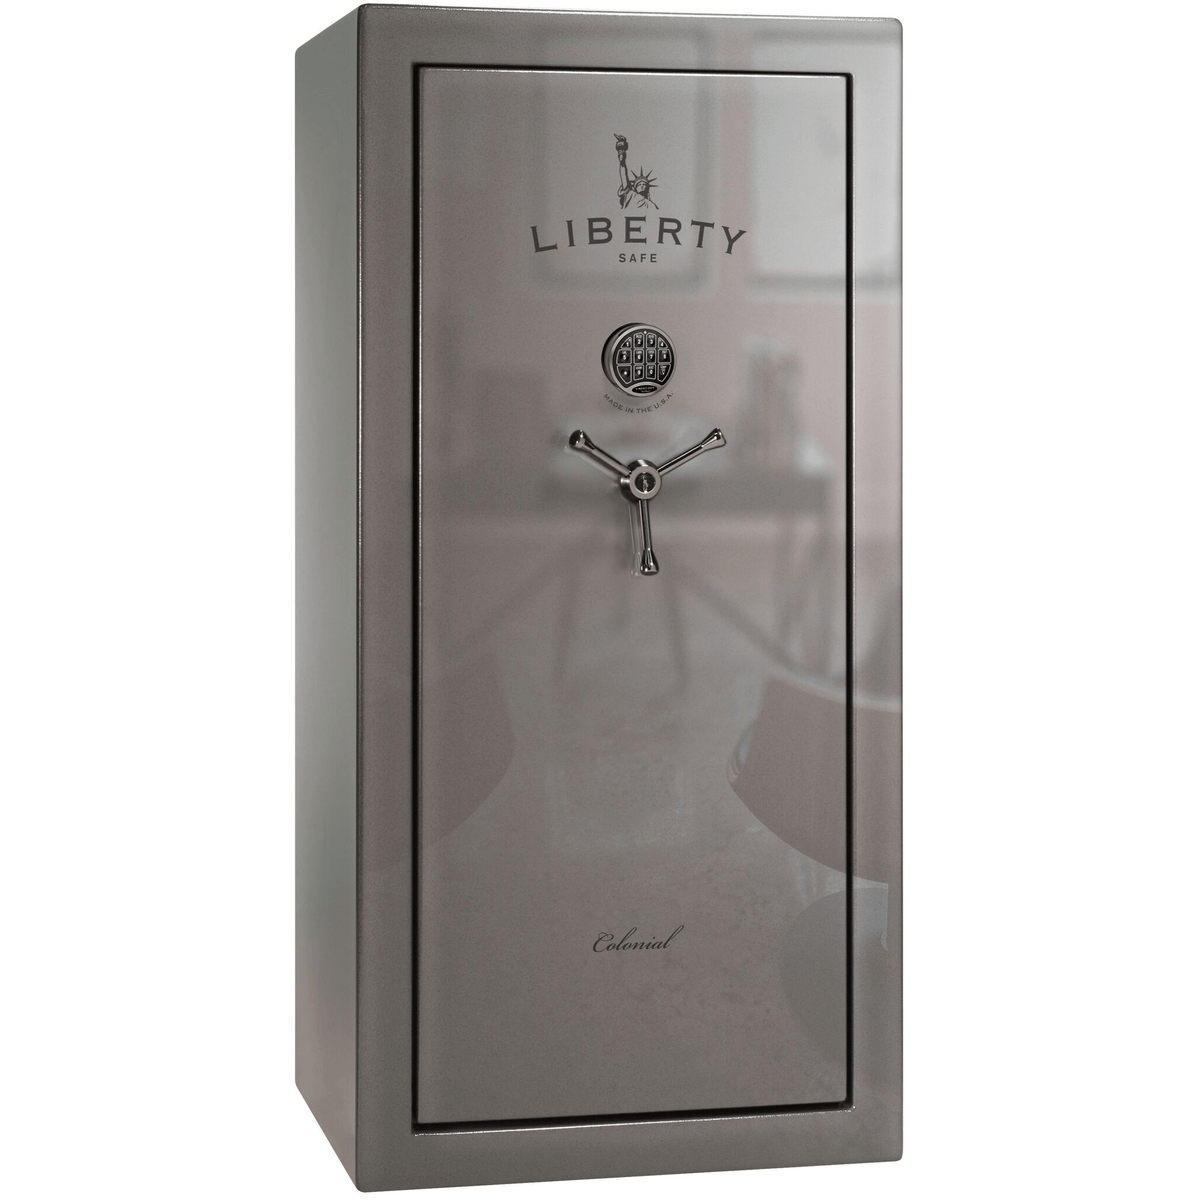 Liberty Colonial 23 Safe in Gray Gloss with Black Chrome Electronic Lock.